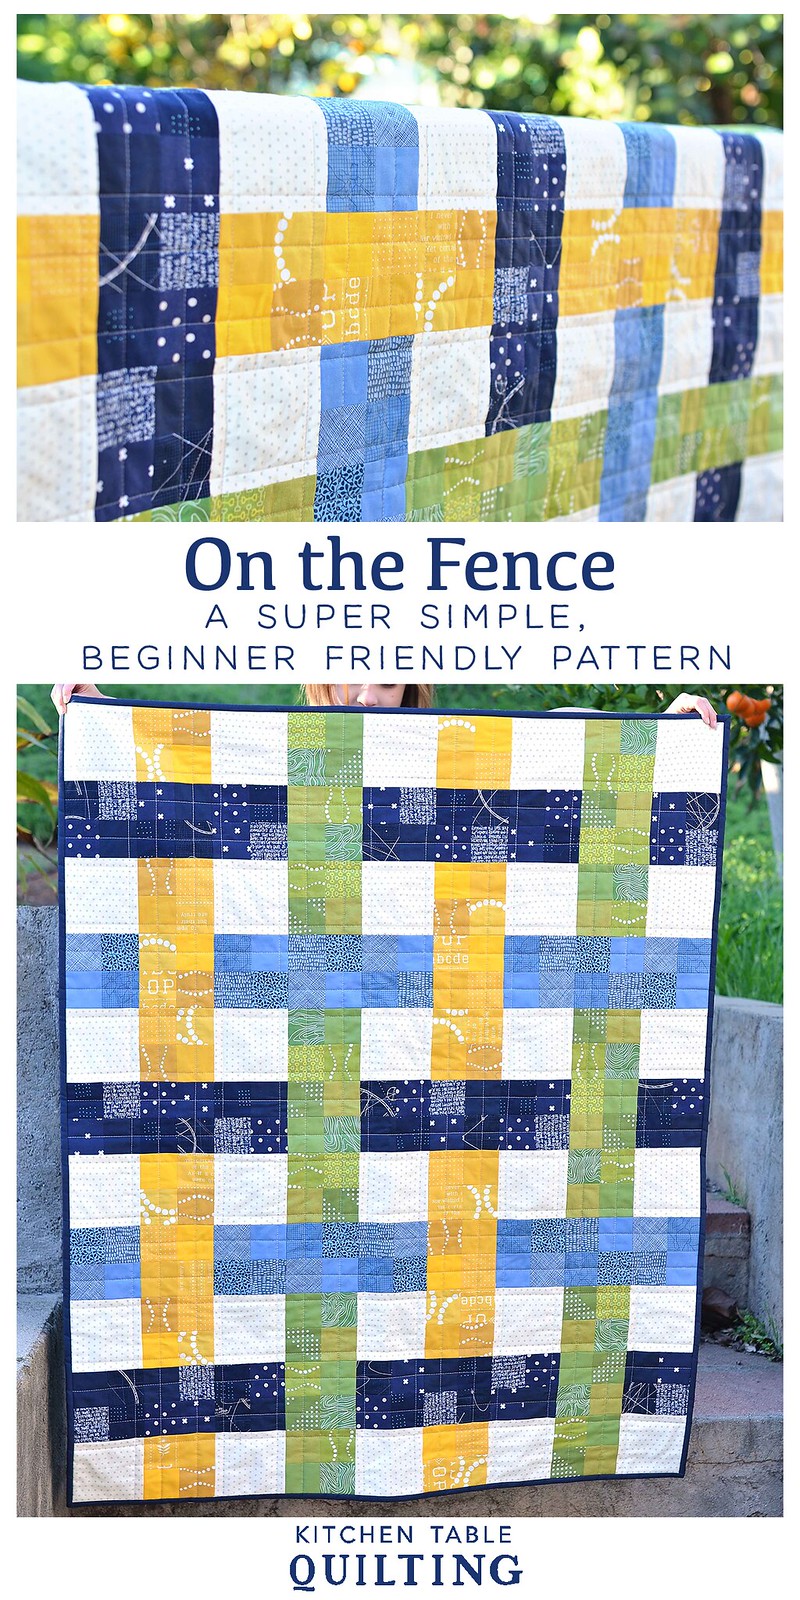 On the Fence - A Super Simple, Beginner Friendly Pattern by Erica Jackman